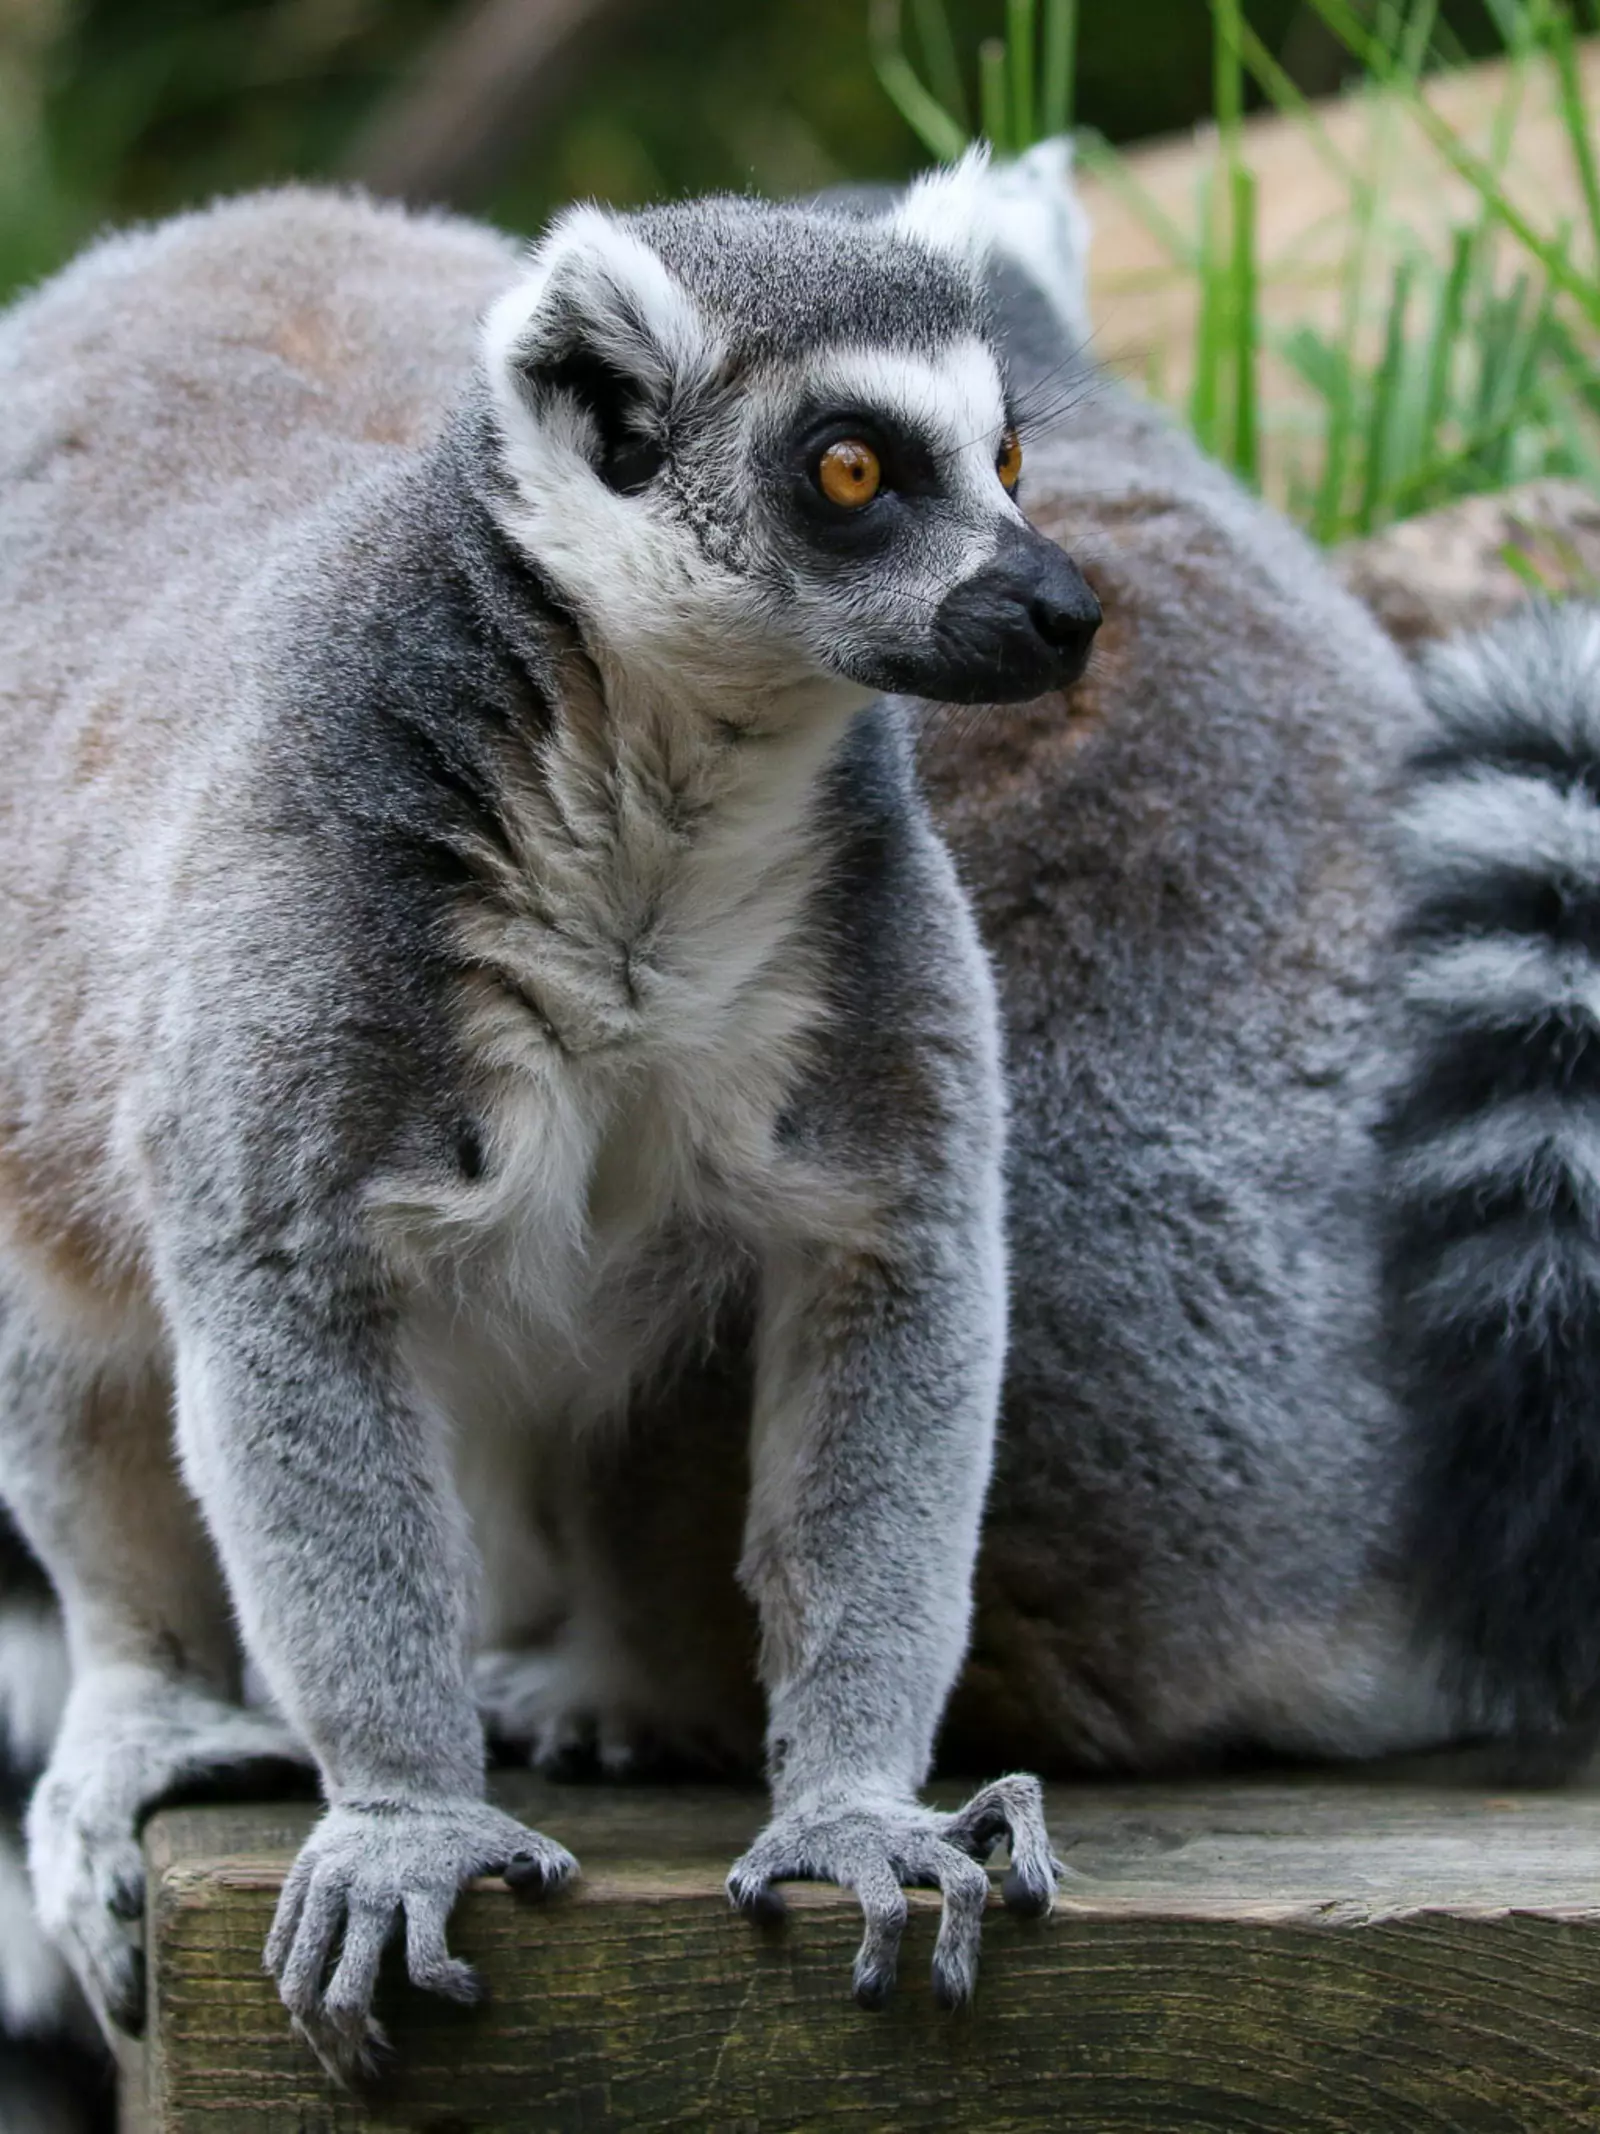 A ring-tailed lemur standing on all fours 